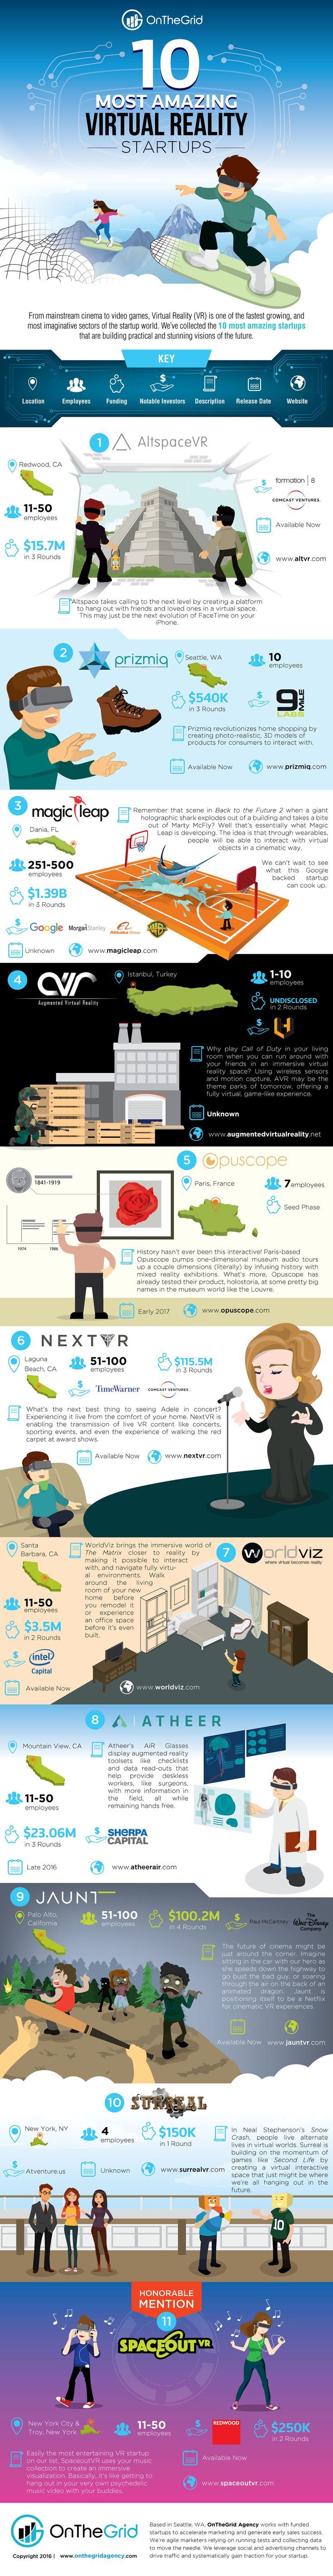 Awesome Virtual Reality Startups - Business Infographic. Topic: tech company, au...